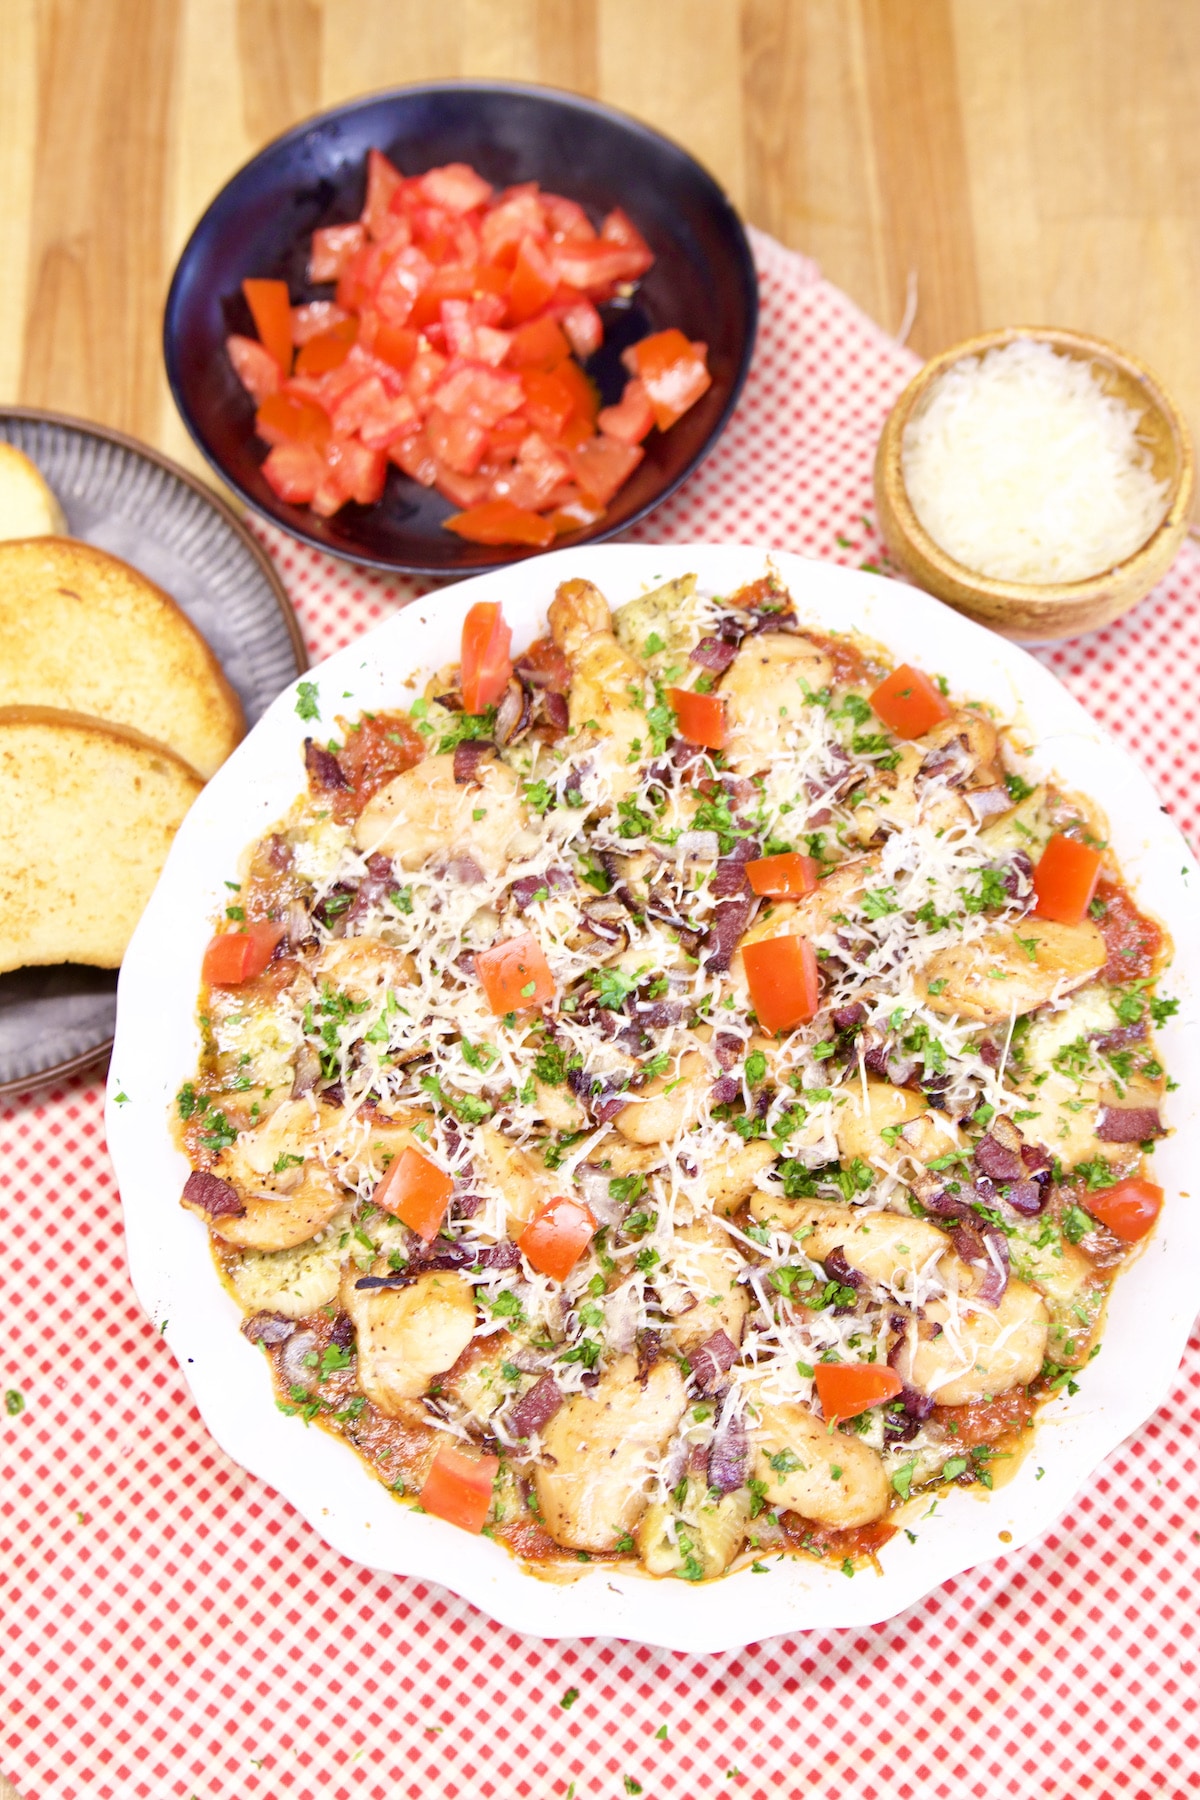 Chicken Stuffed Pasta casserole with bowl of tomatoes, parmesan and garlic bread.